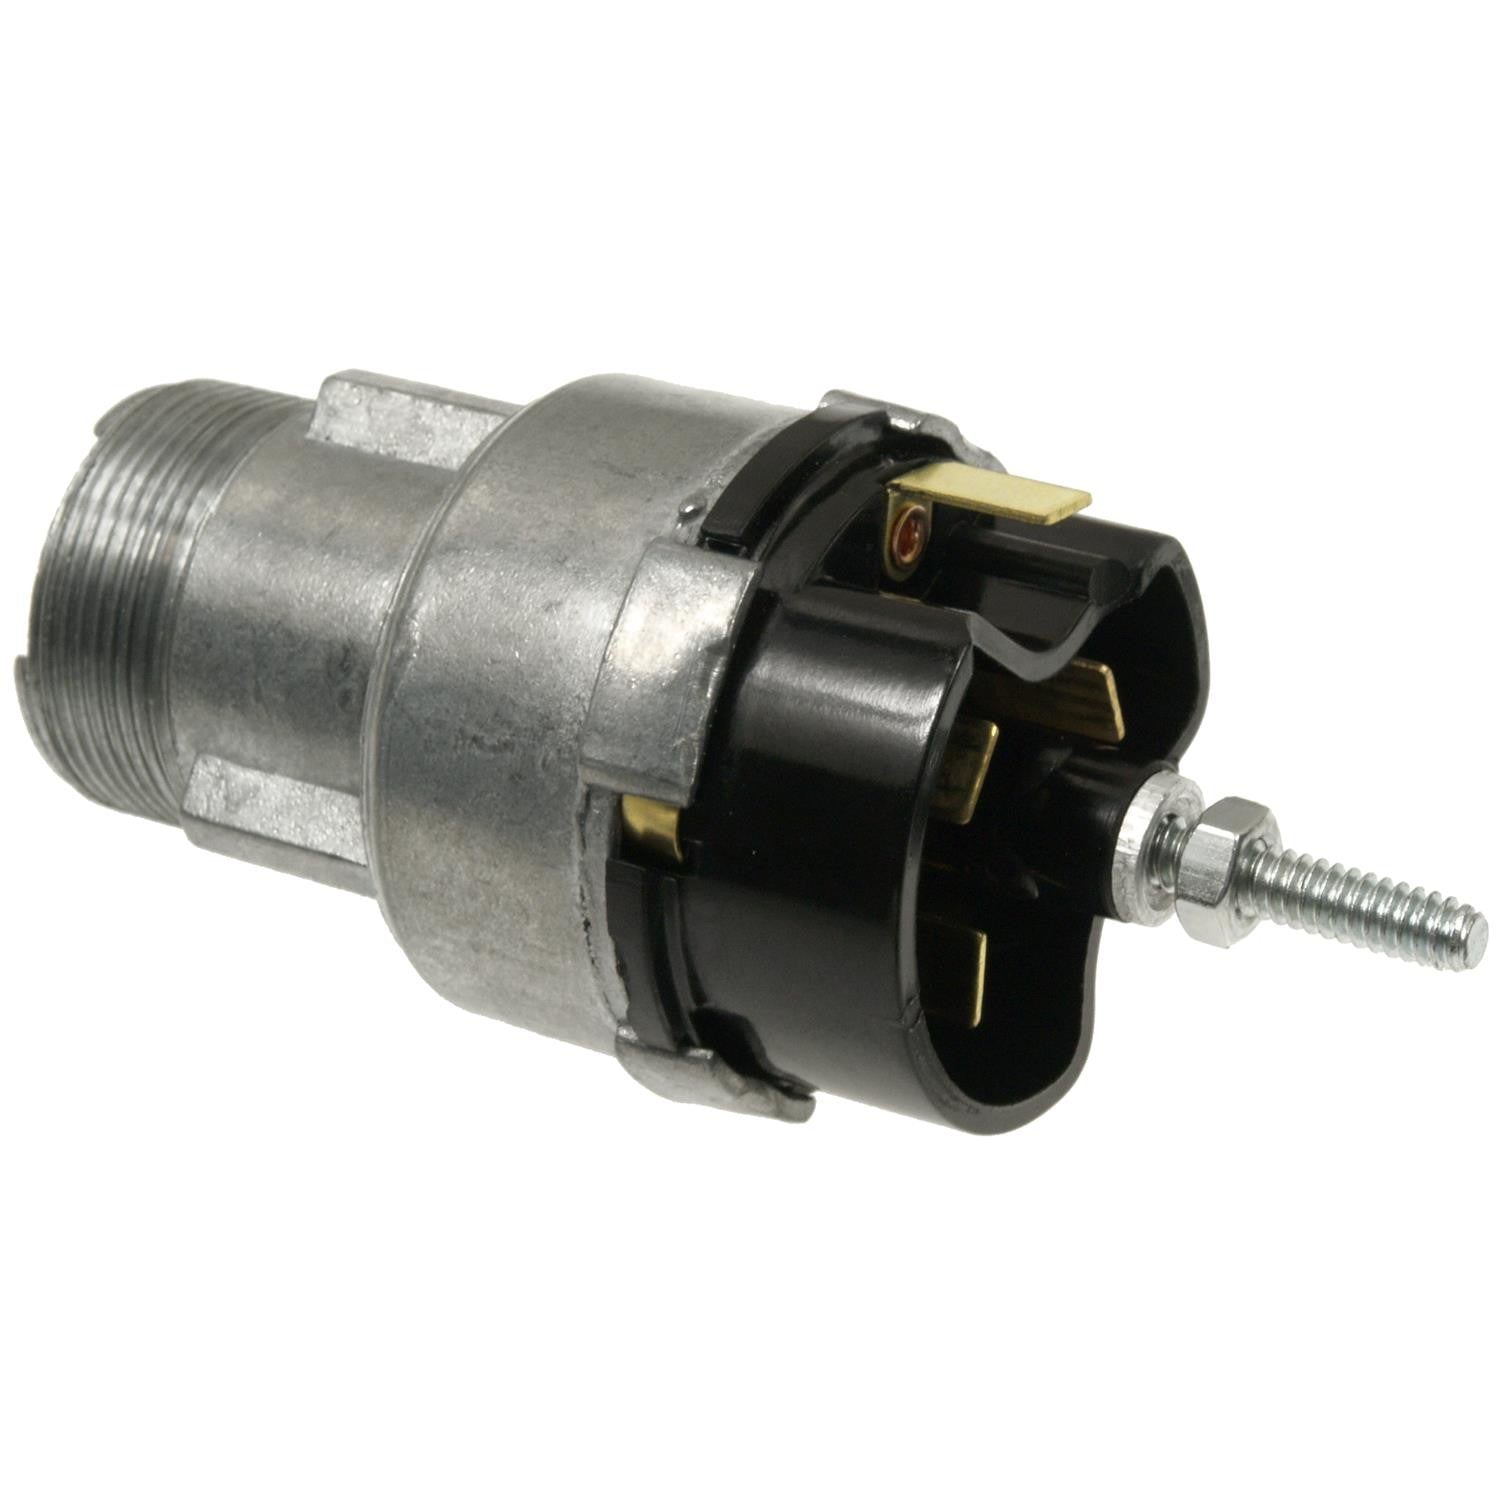 Standard US-49  Ignition Switch for Ford Mercury